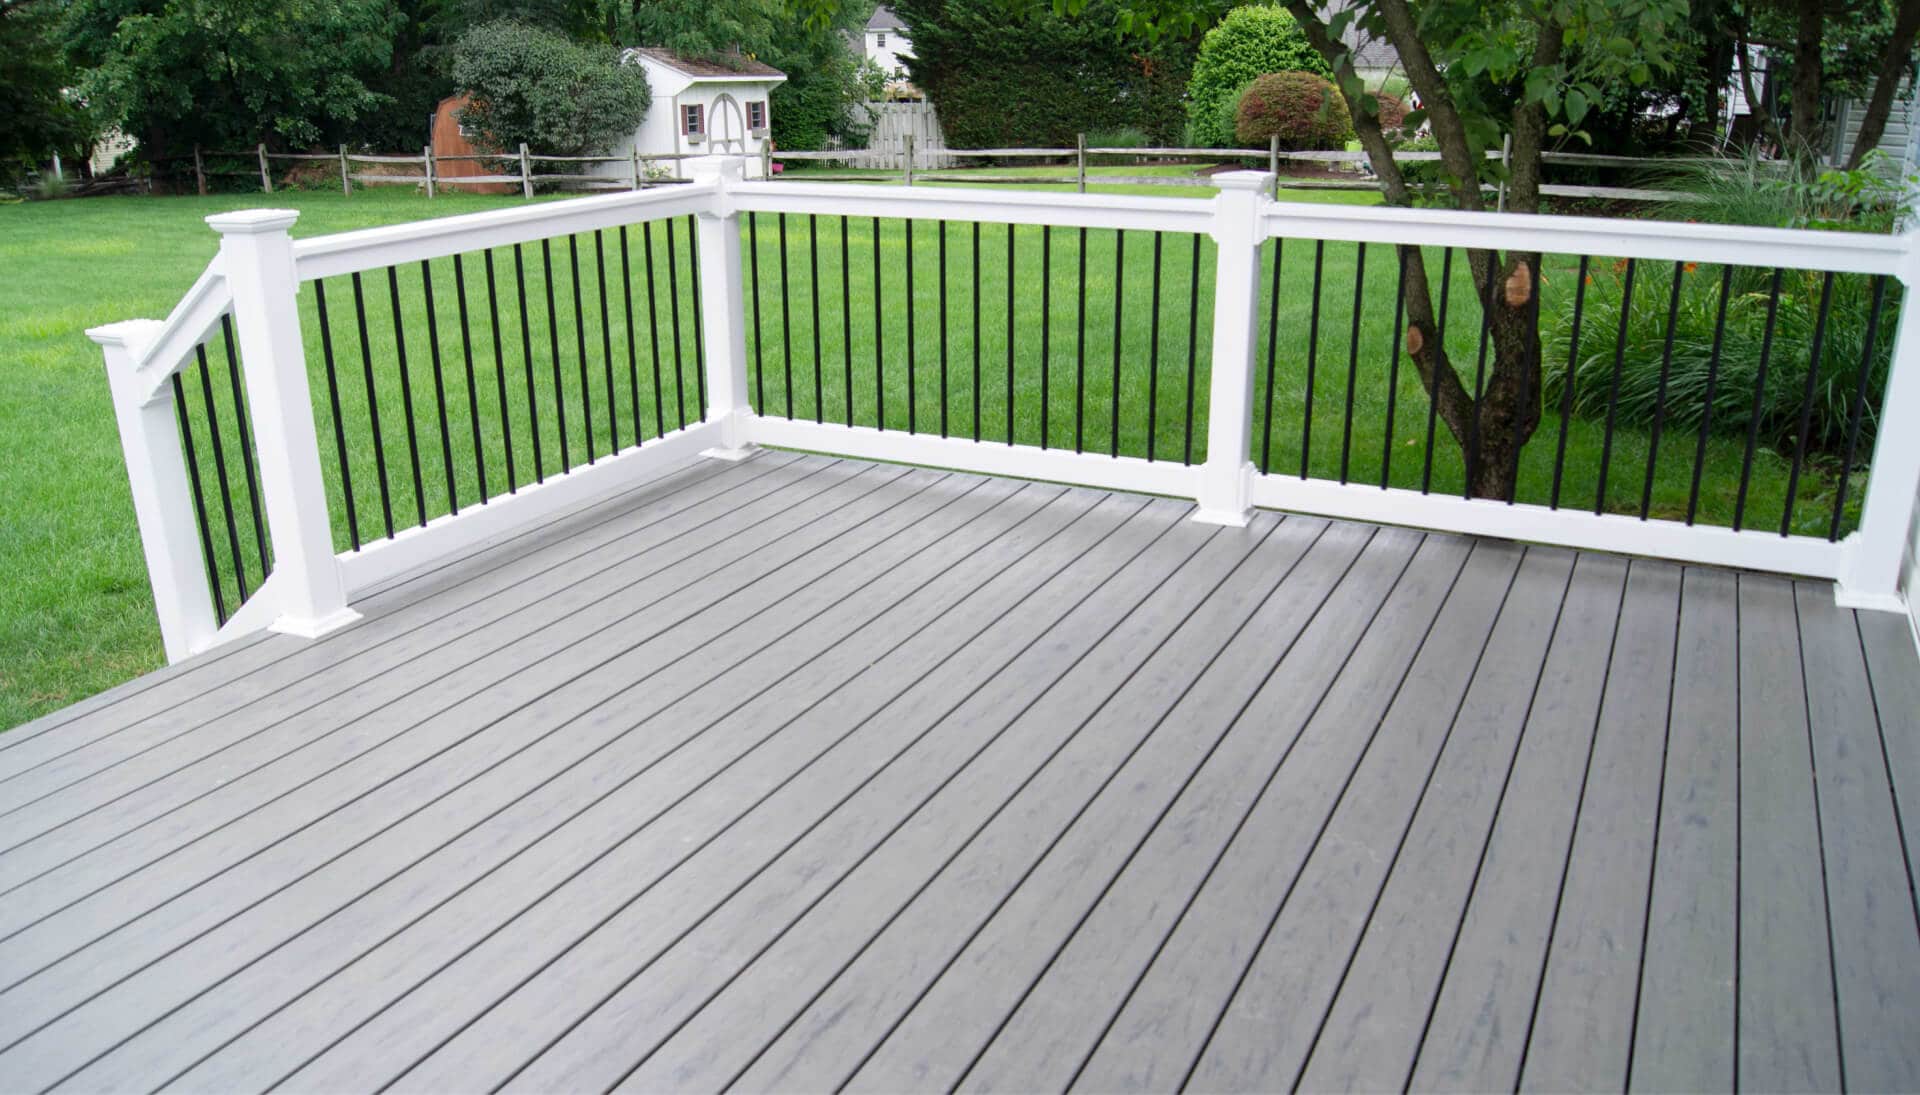 Specialists in deck railing and covers York, Pennsylvania